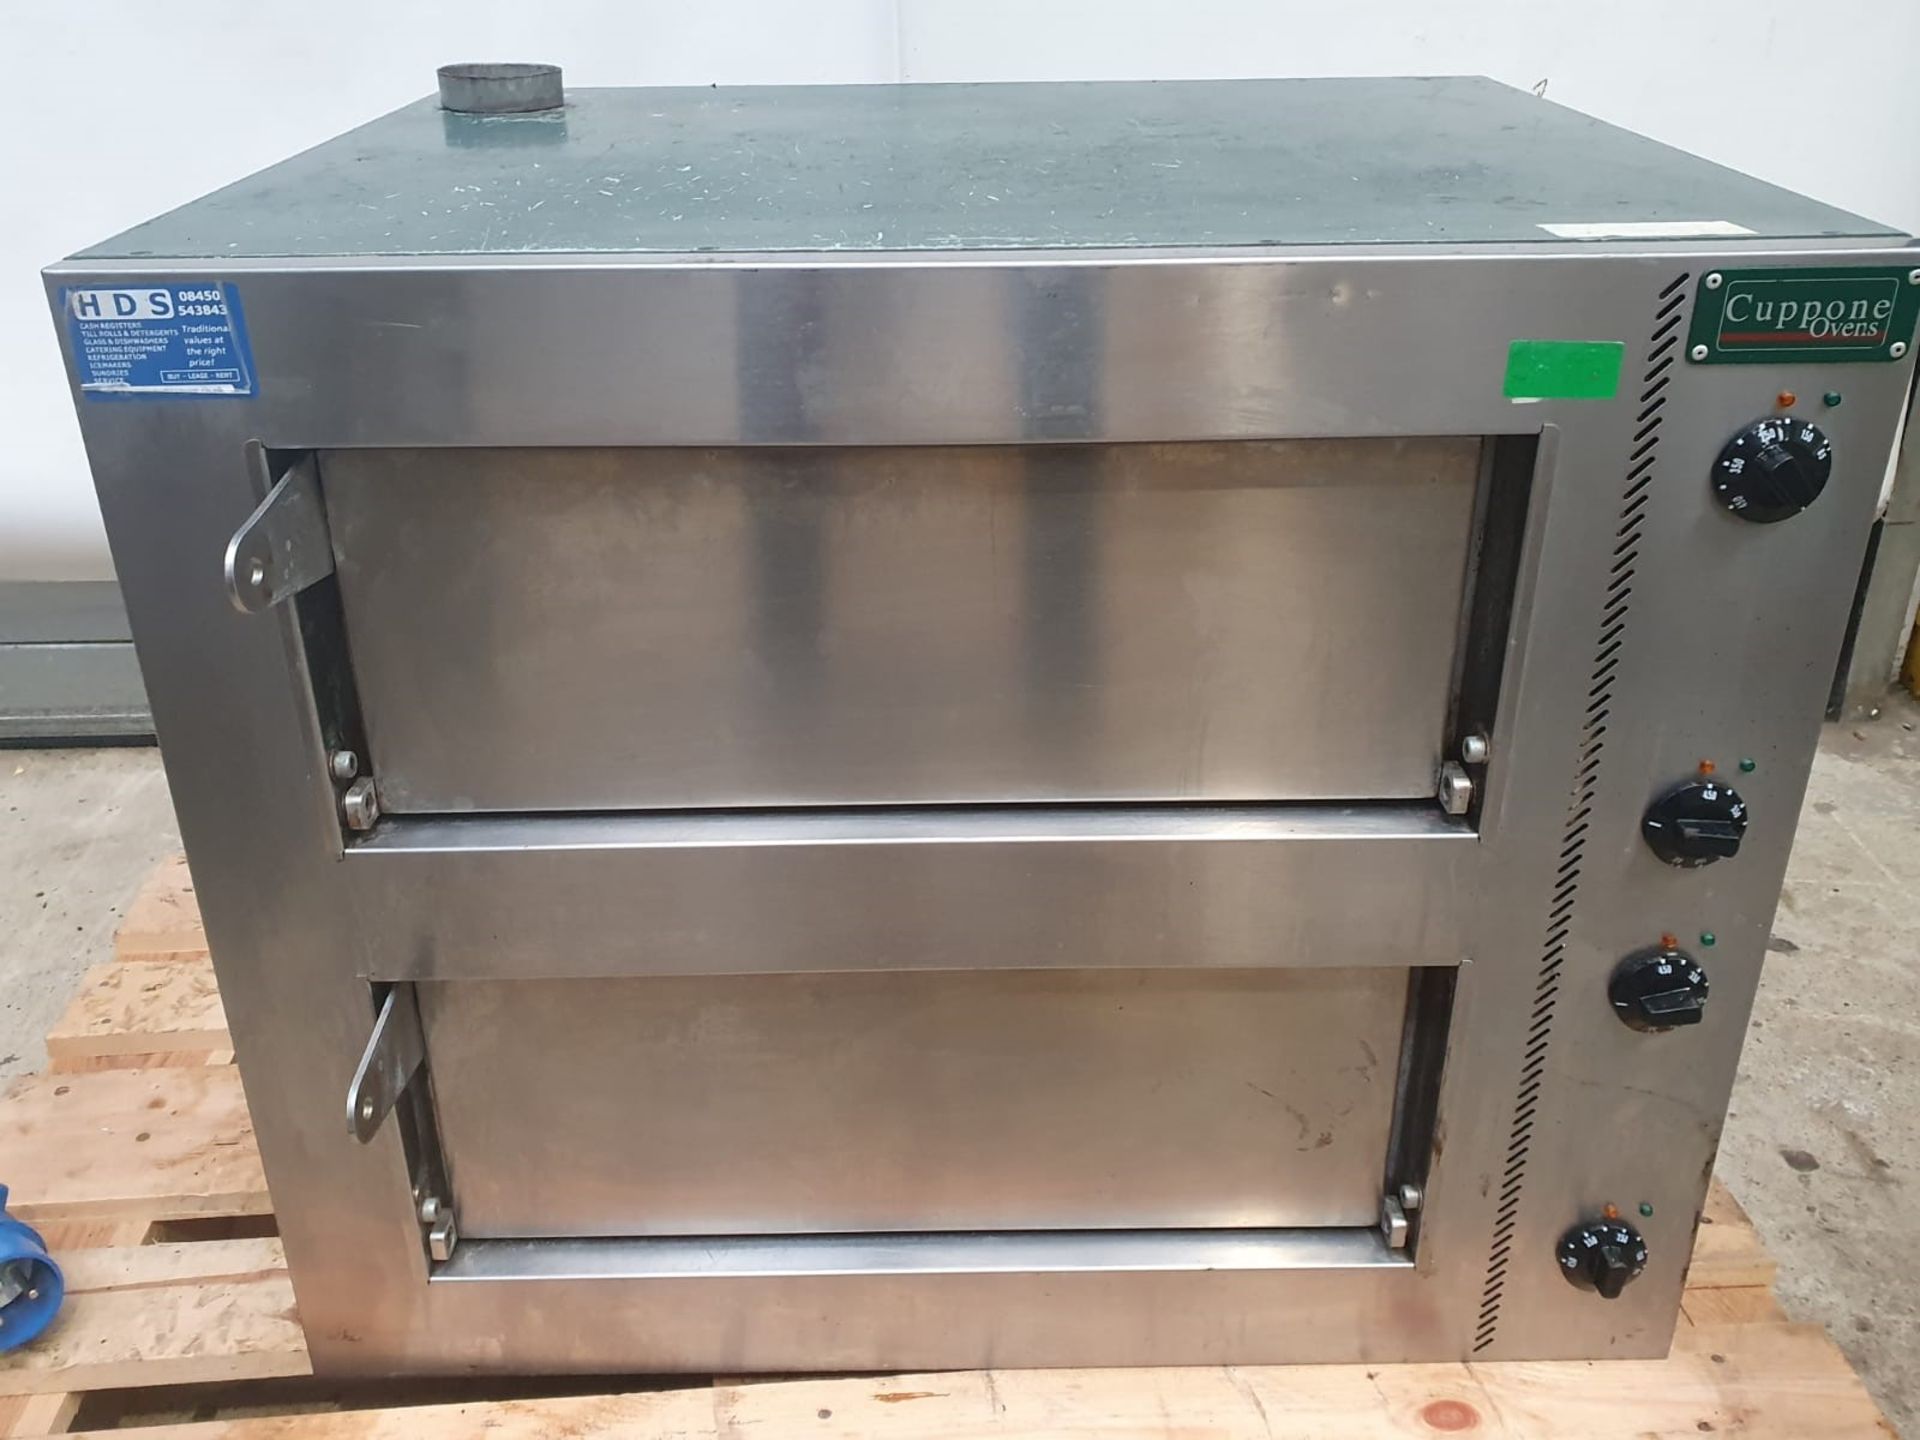 Capone Twin deck pizza oven This top quality manufactured this Twin Deck Electric Pizza Oven is